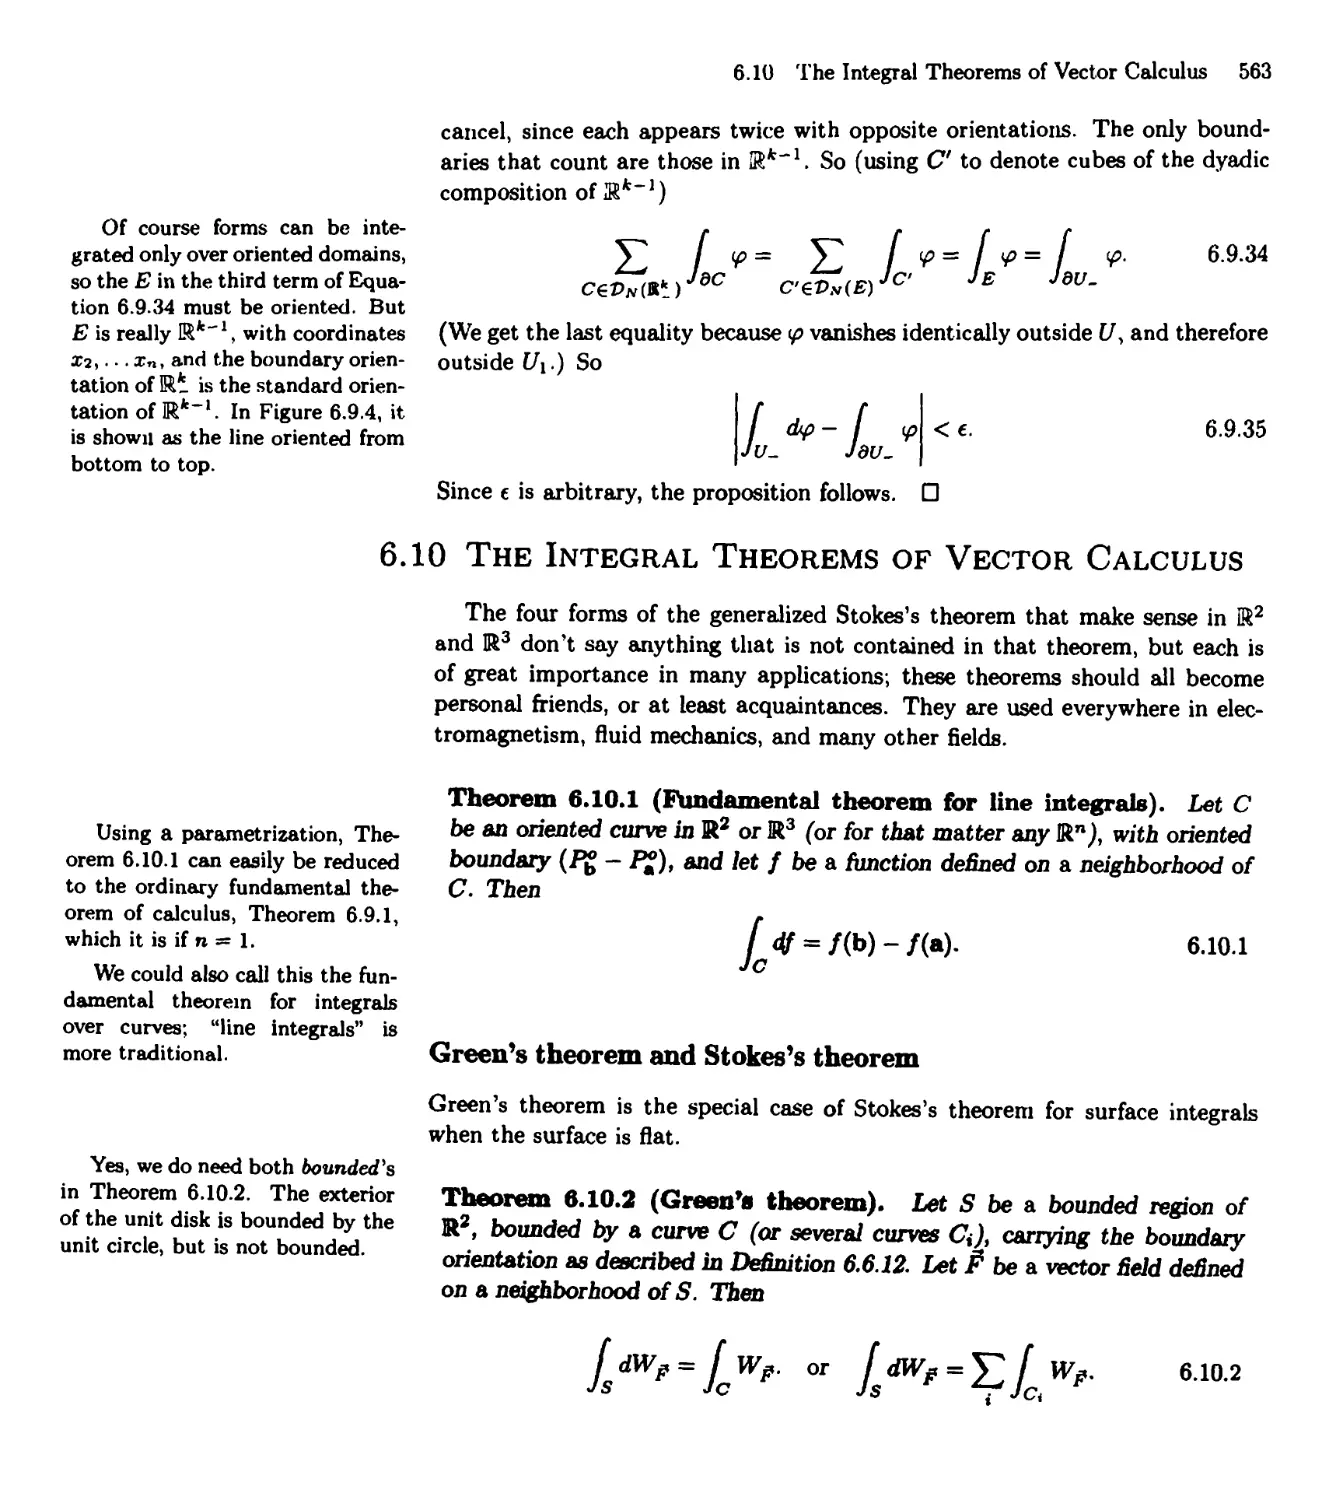 6.10 The Integral Theorems of Vector Calculus